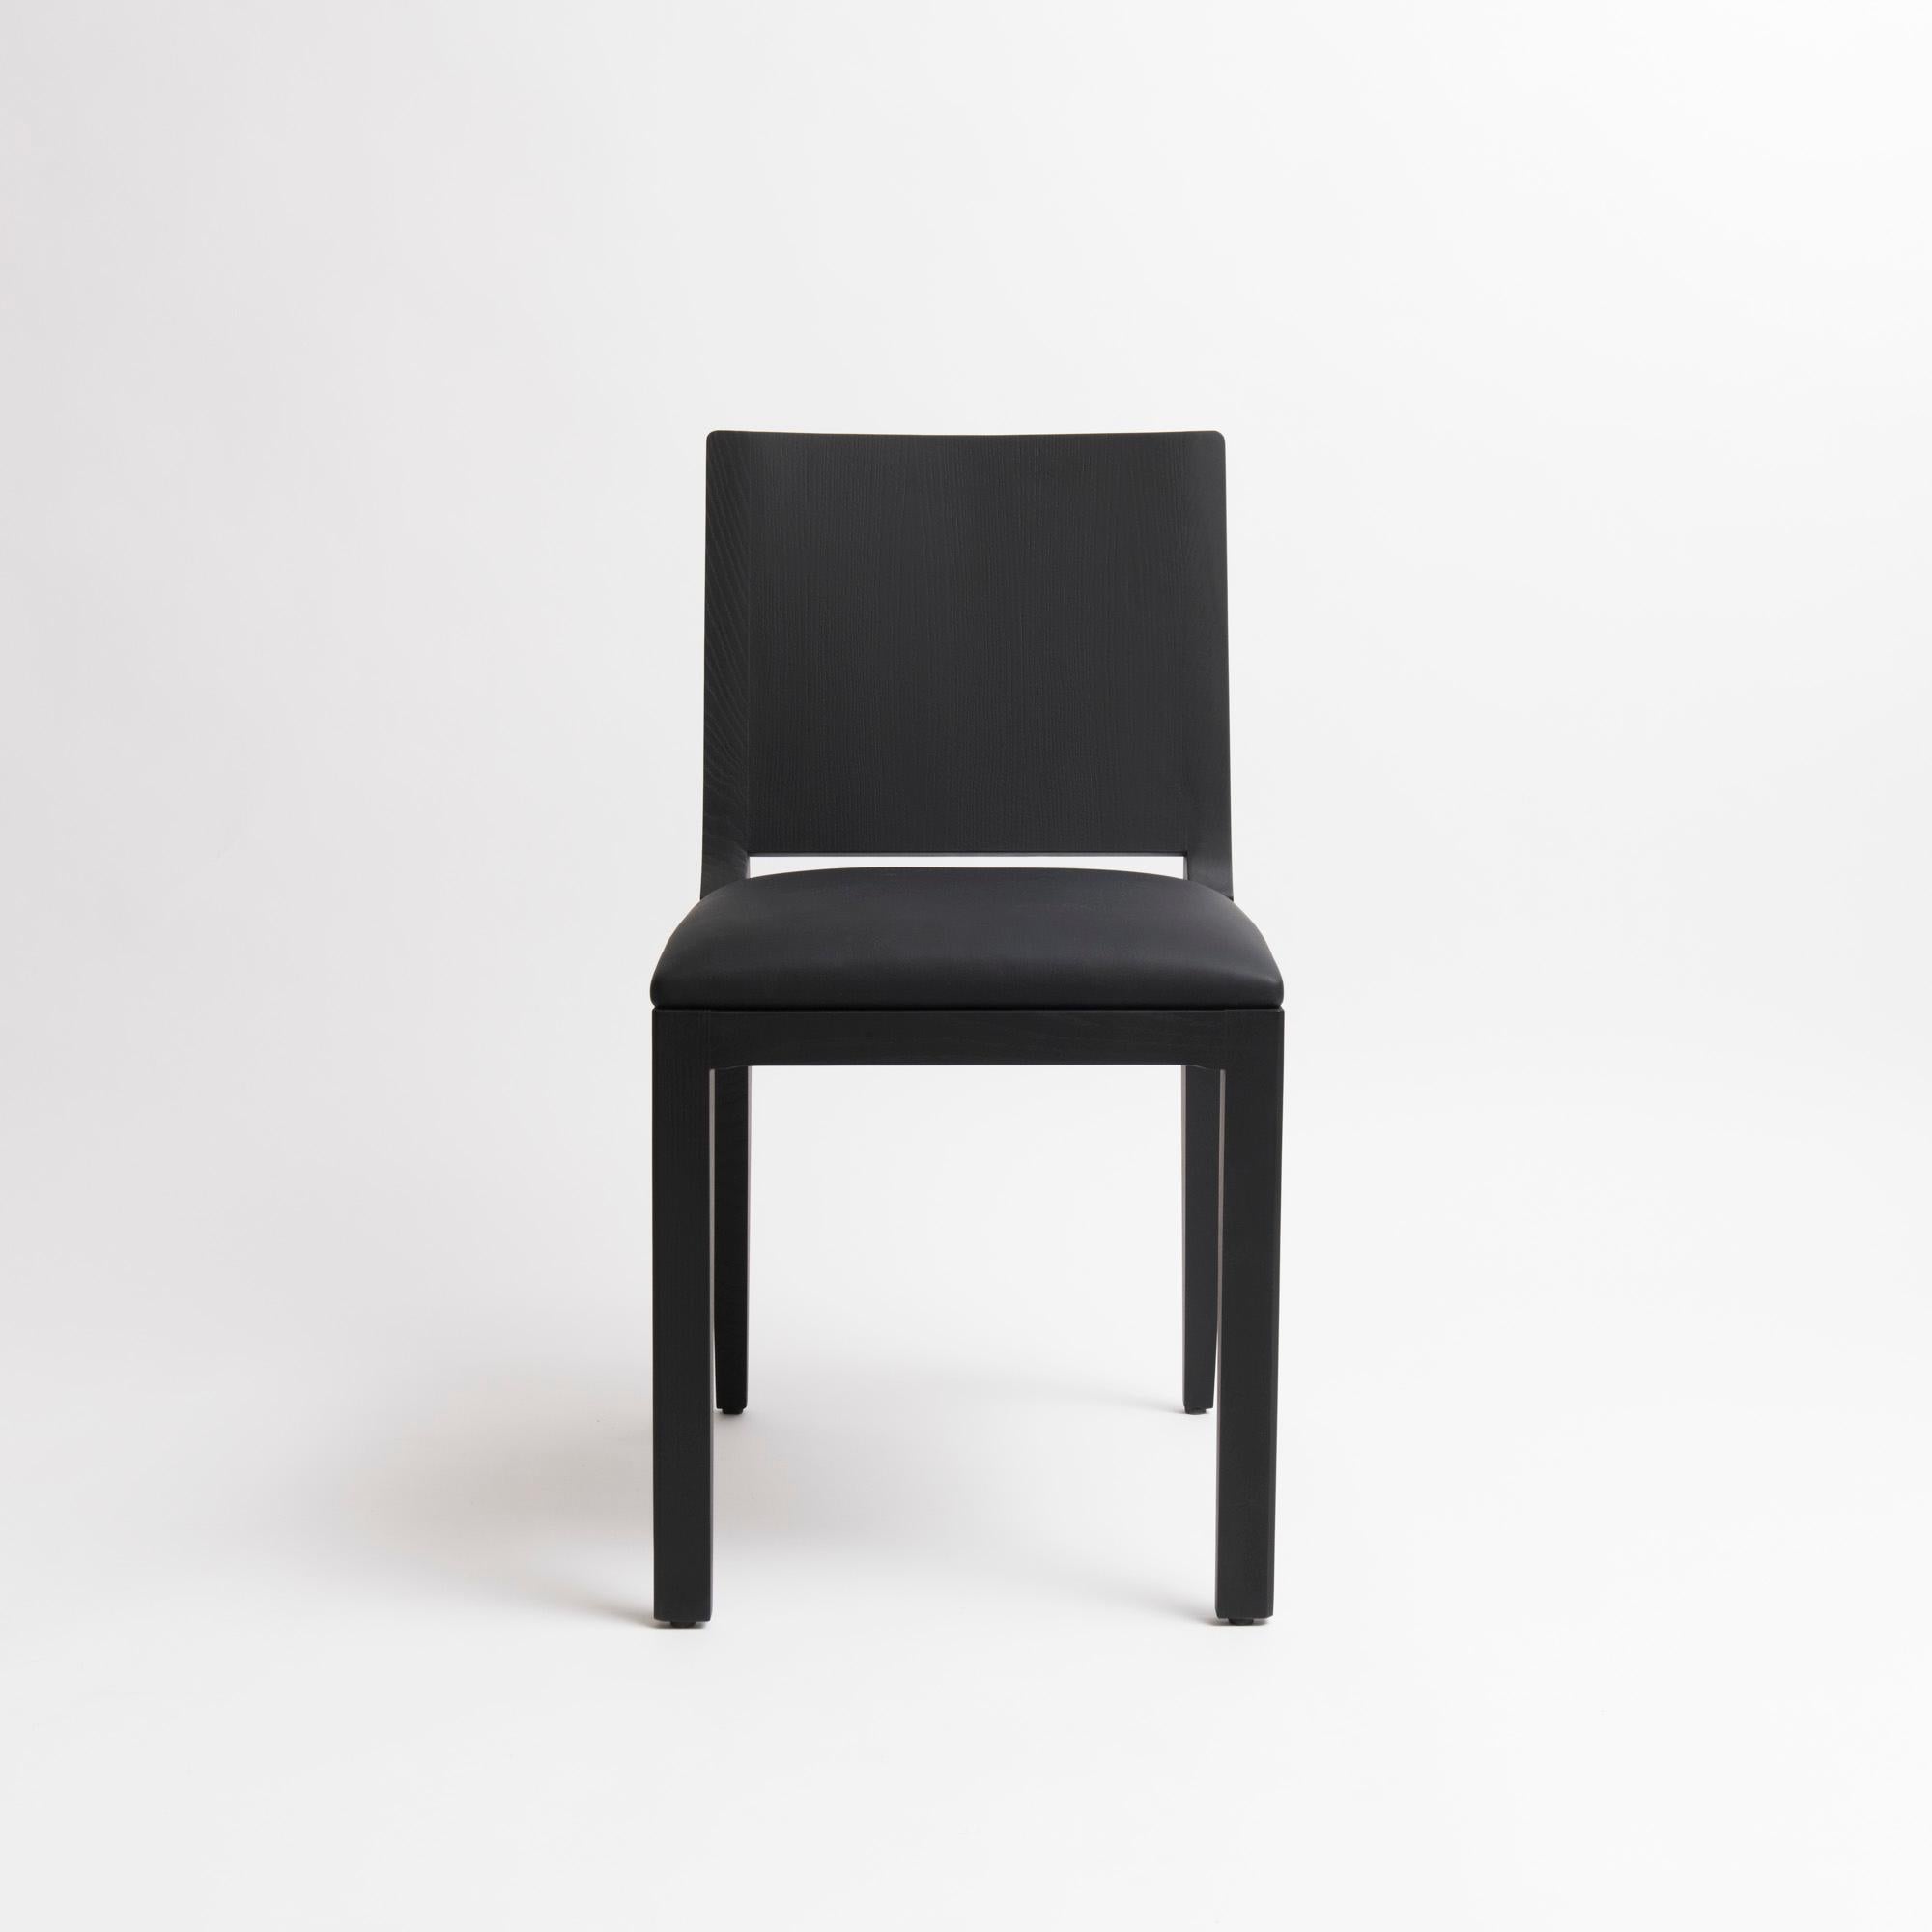 Minimal modern design chair by Parisian based studio mjiila. The om5.1 is a contemporary upholstered high-end chair handcrafted by skilled cabinetmaker. Available in black stained ash, matte varnish finish, upholstered with premium black leather.